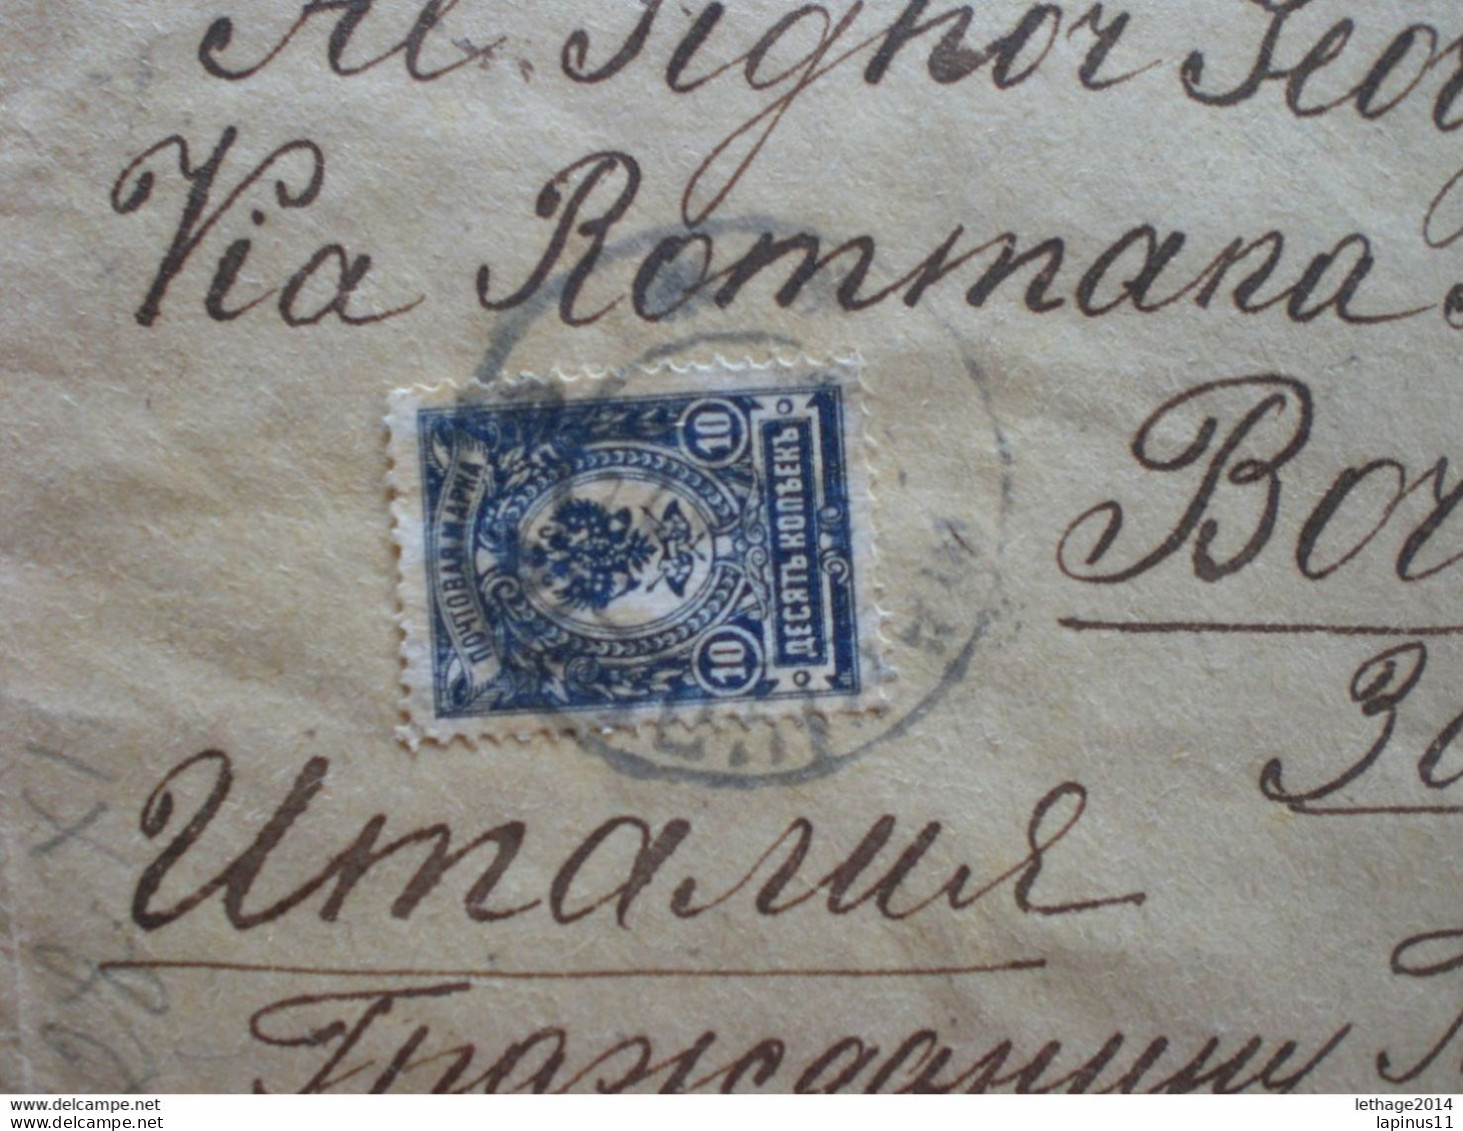 RUSSIA RUSSIE РОССИЯ STAMPS COVER 1923 Registered Mail RUSSIE TO ITALY MANY STAMPS FULL 30 STAMPS !! RRRRR RIF.TAGG.(2) - Cartas & Documentos